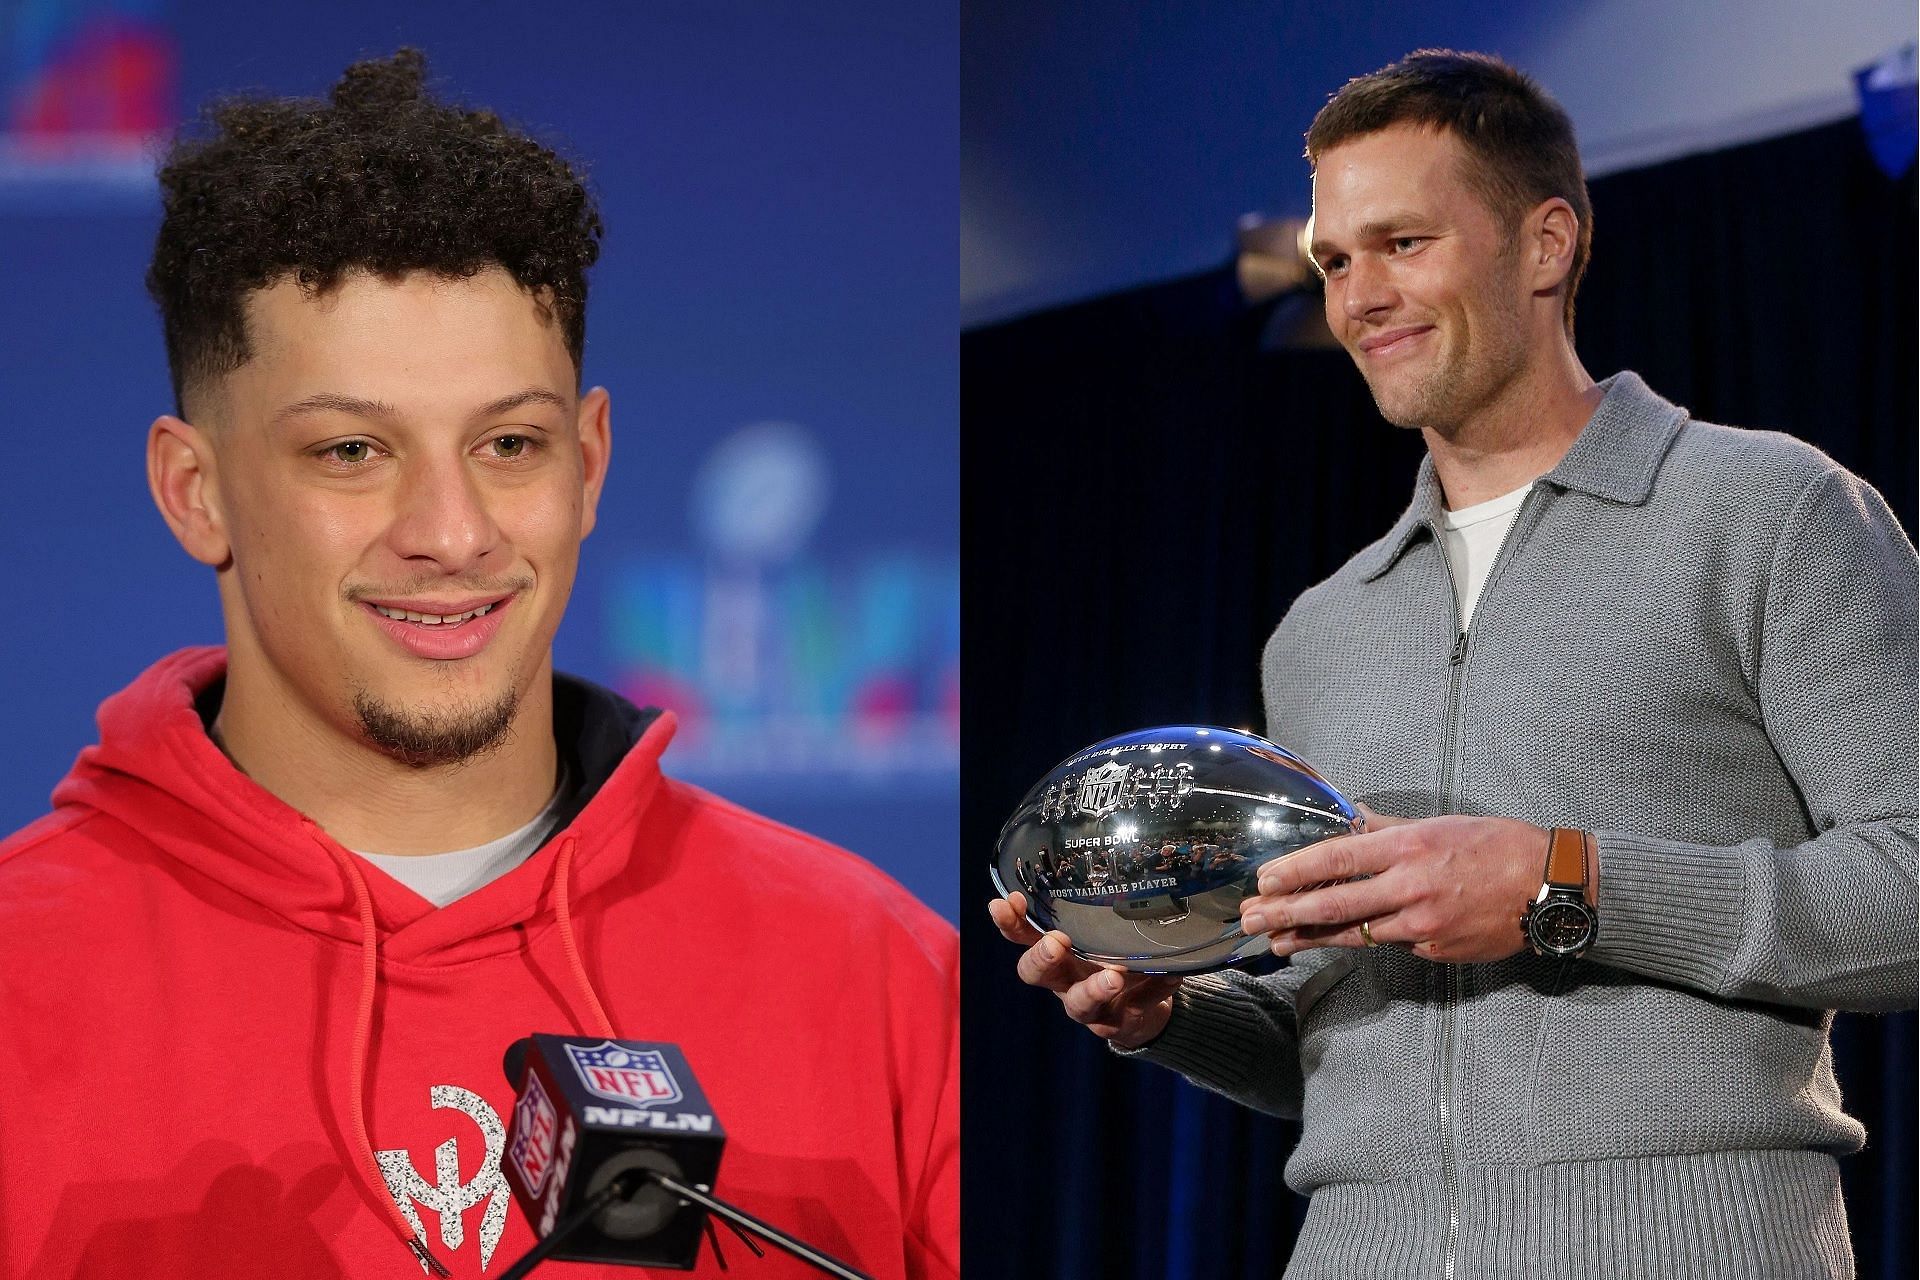 NFL fans debate about Patrick Mahomes pipping Tom Brady to become NFL&rsquo;s best quarterback ever